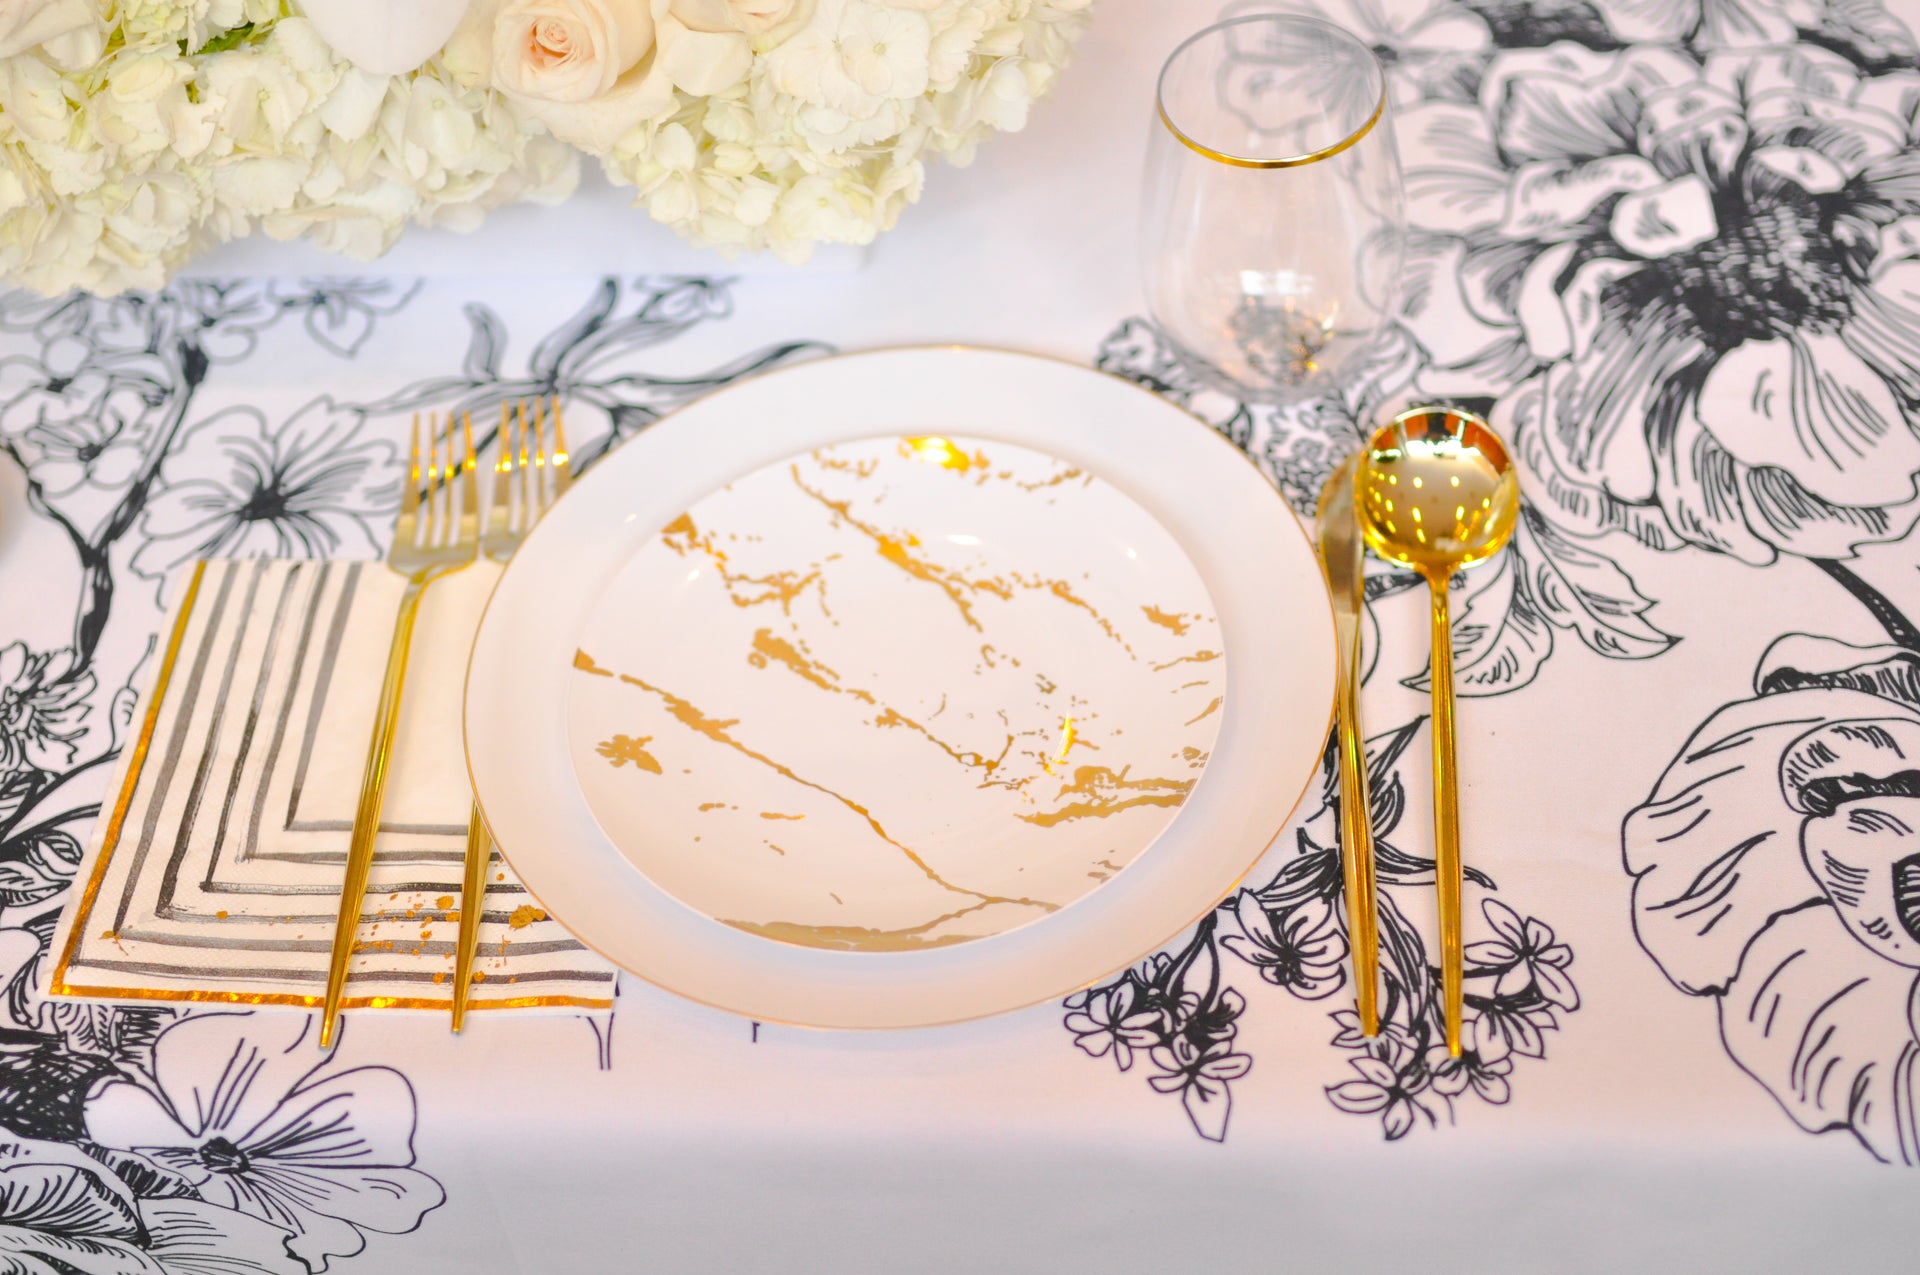 January Inspiration: Elegant Silver and White Winter Tablescape